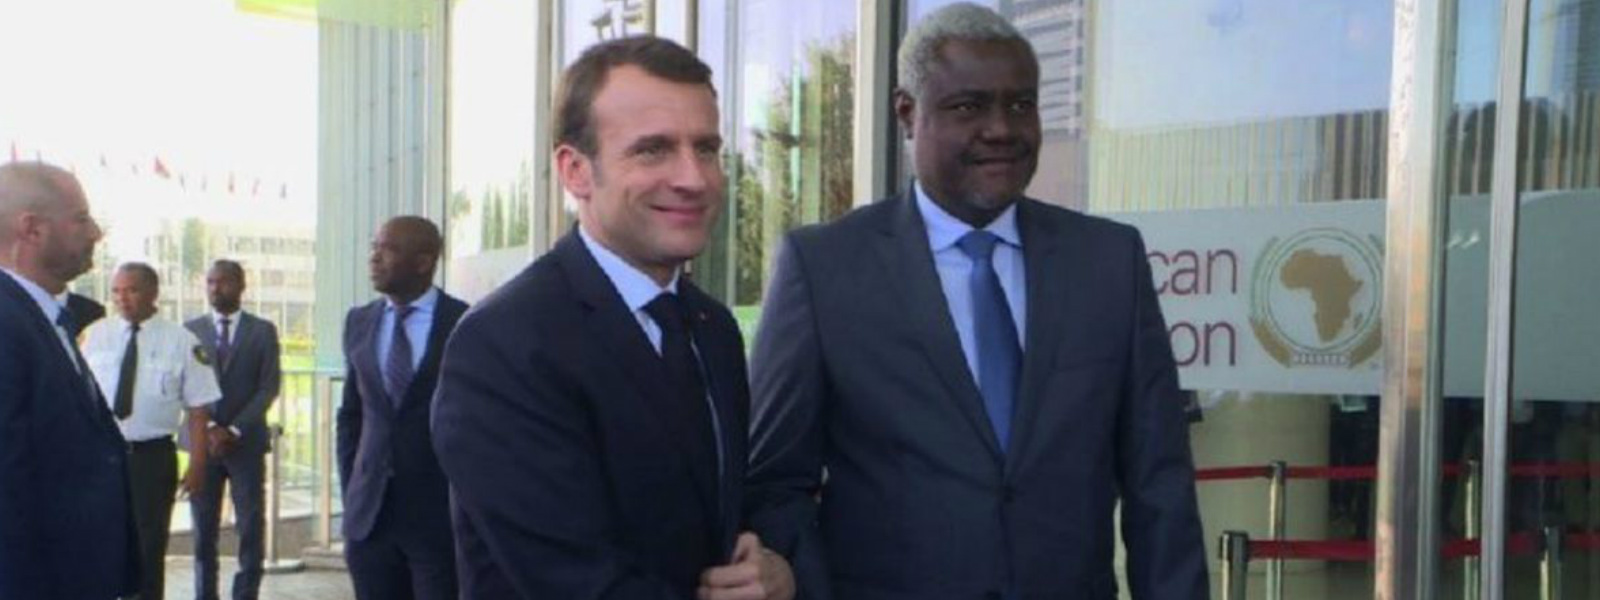 Macron visits African Union HQ in Ethiopia